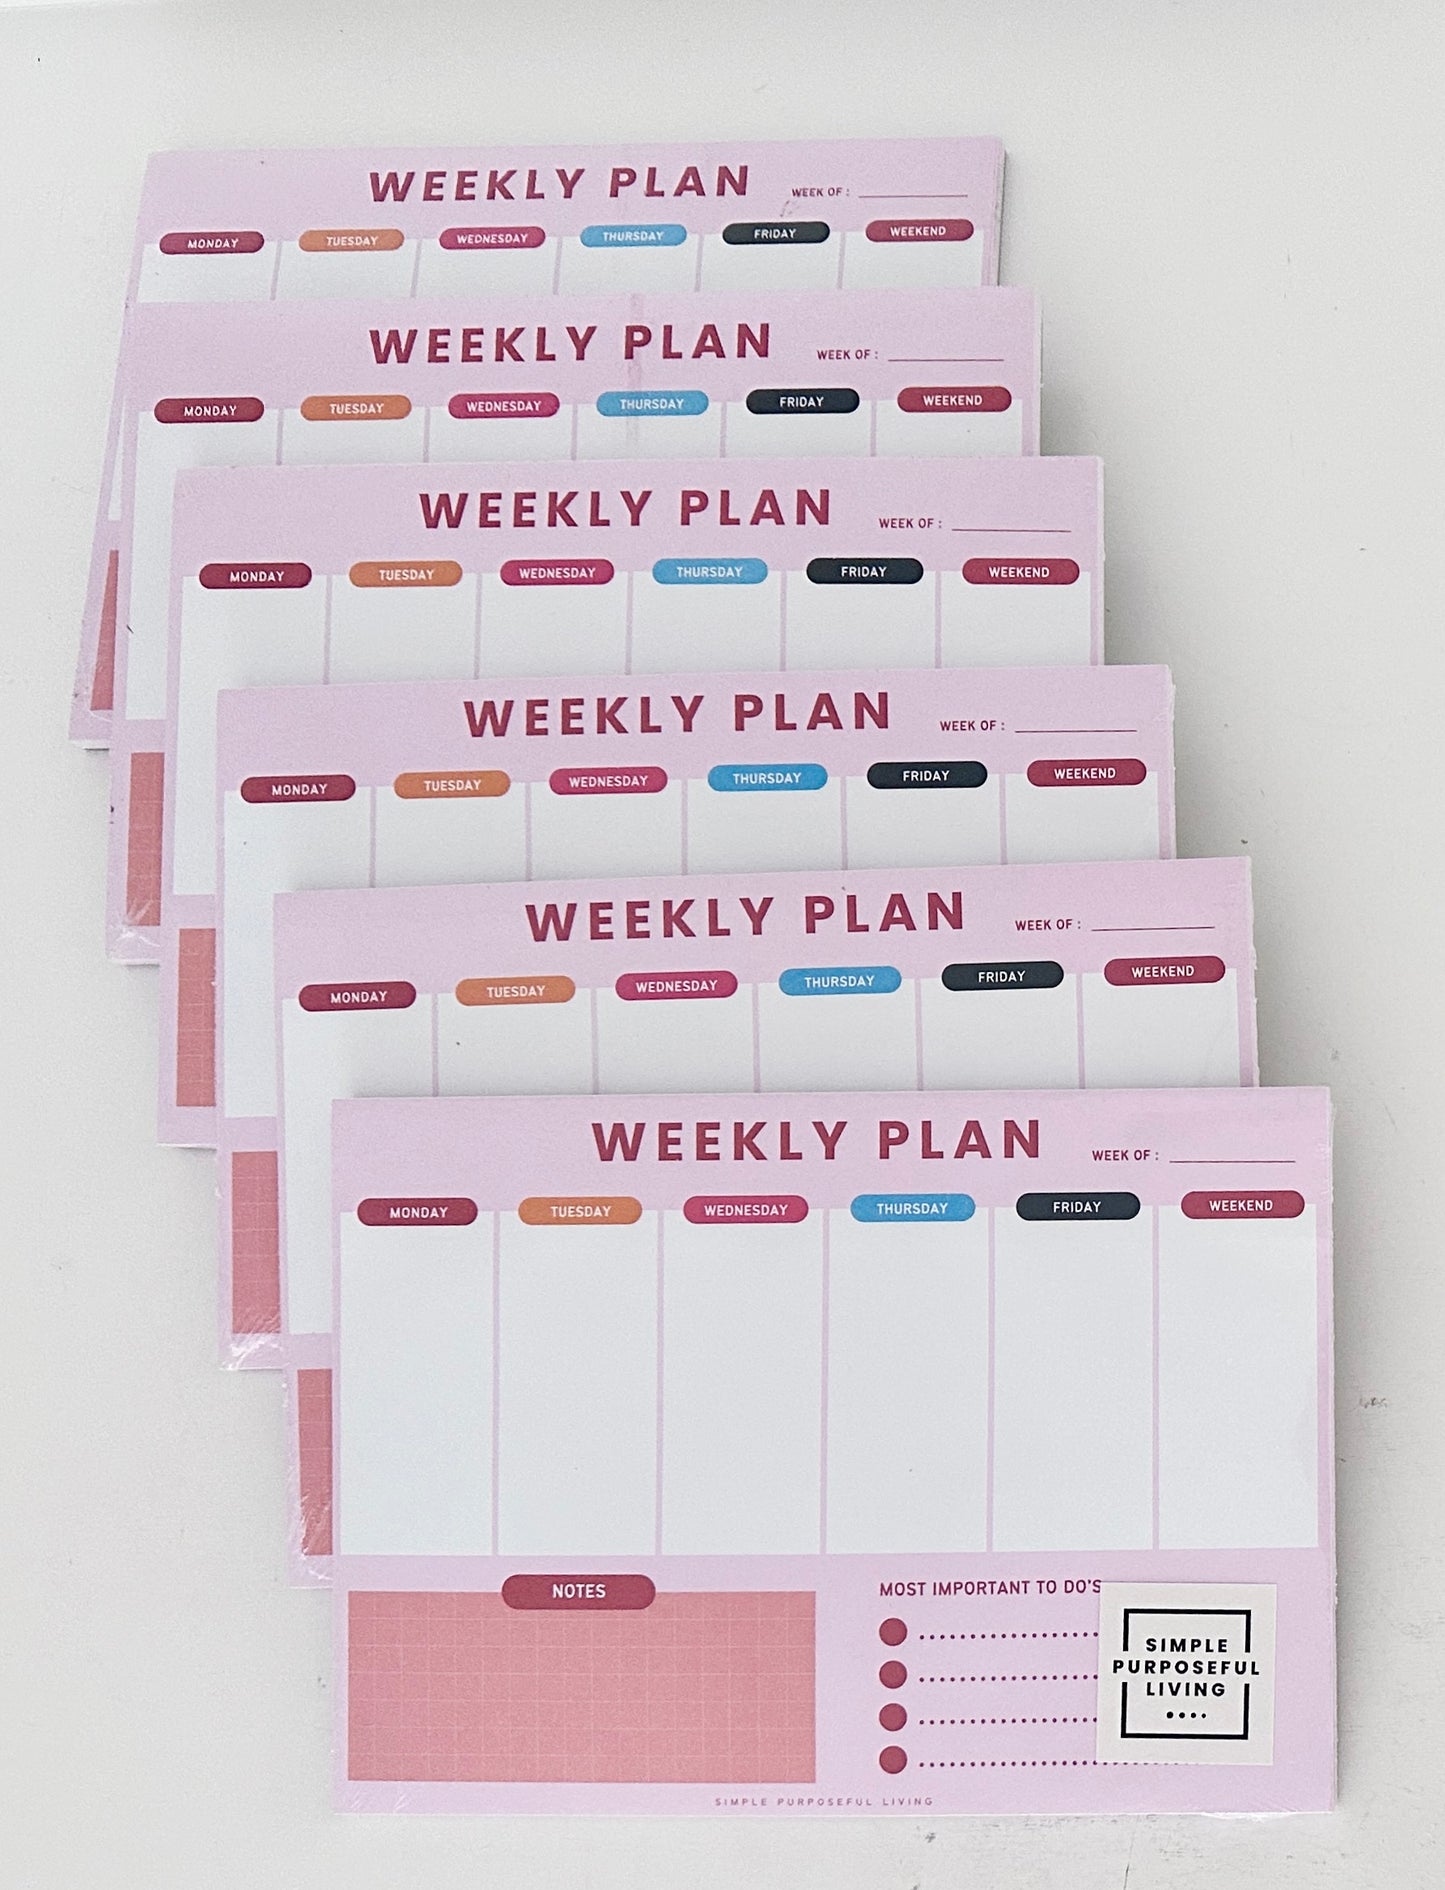 mage of Simple Purposeful Living Weekly Planner Notepad Bundle - Six Notepads for Weekly Planning, Buy 5 Get 1 Free, Free Shipping, Ideal Gift for Teachers, Graduates, Moms. Modern Design, Ample Space, Undated Calendar System, High-Quality Paper.